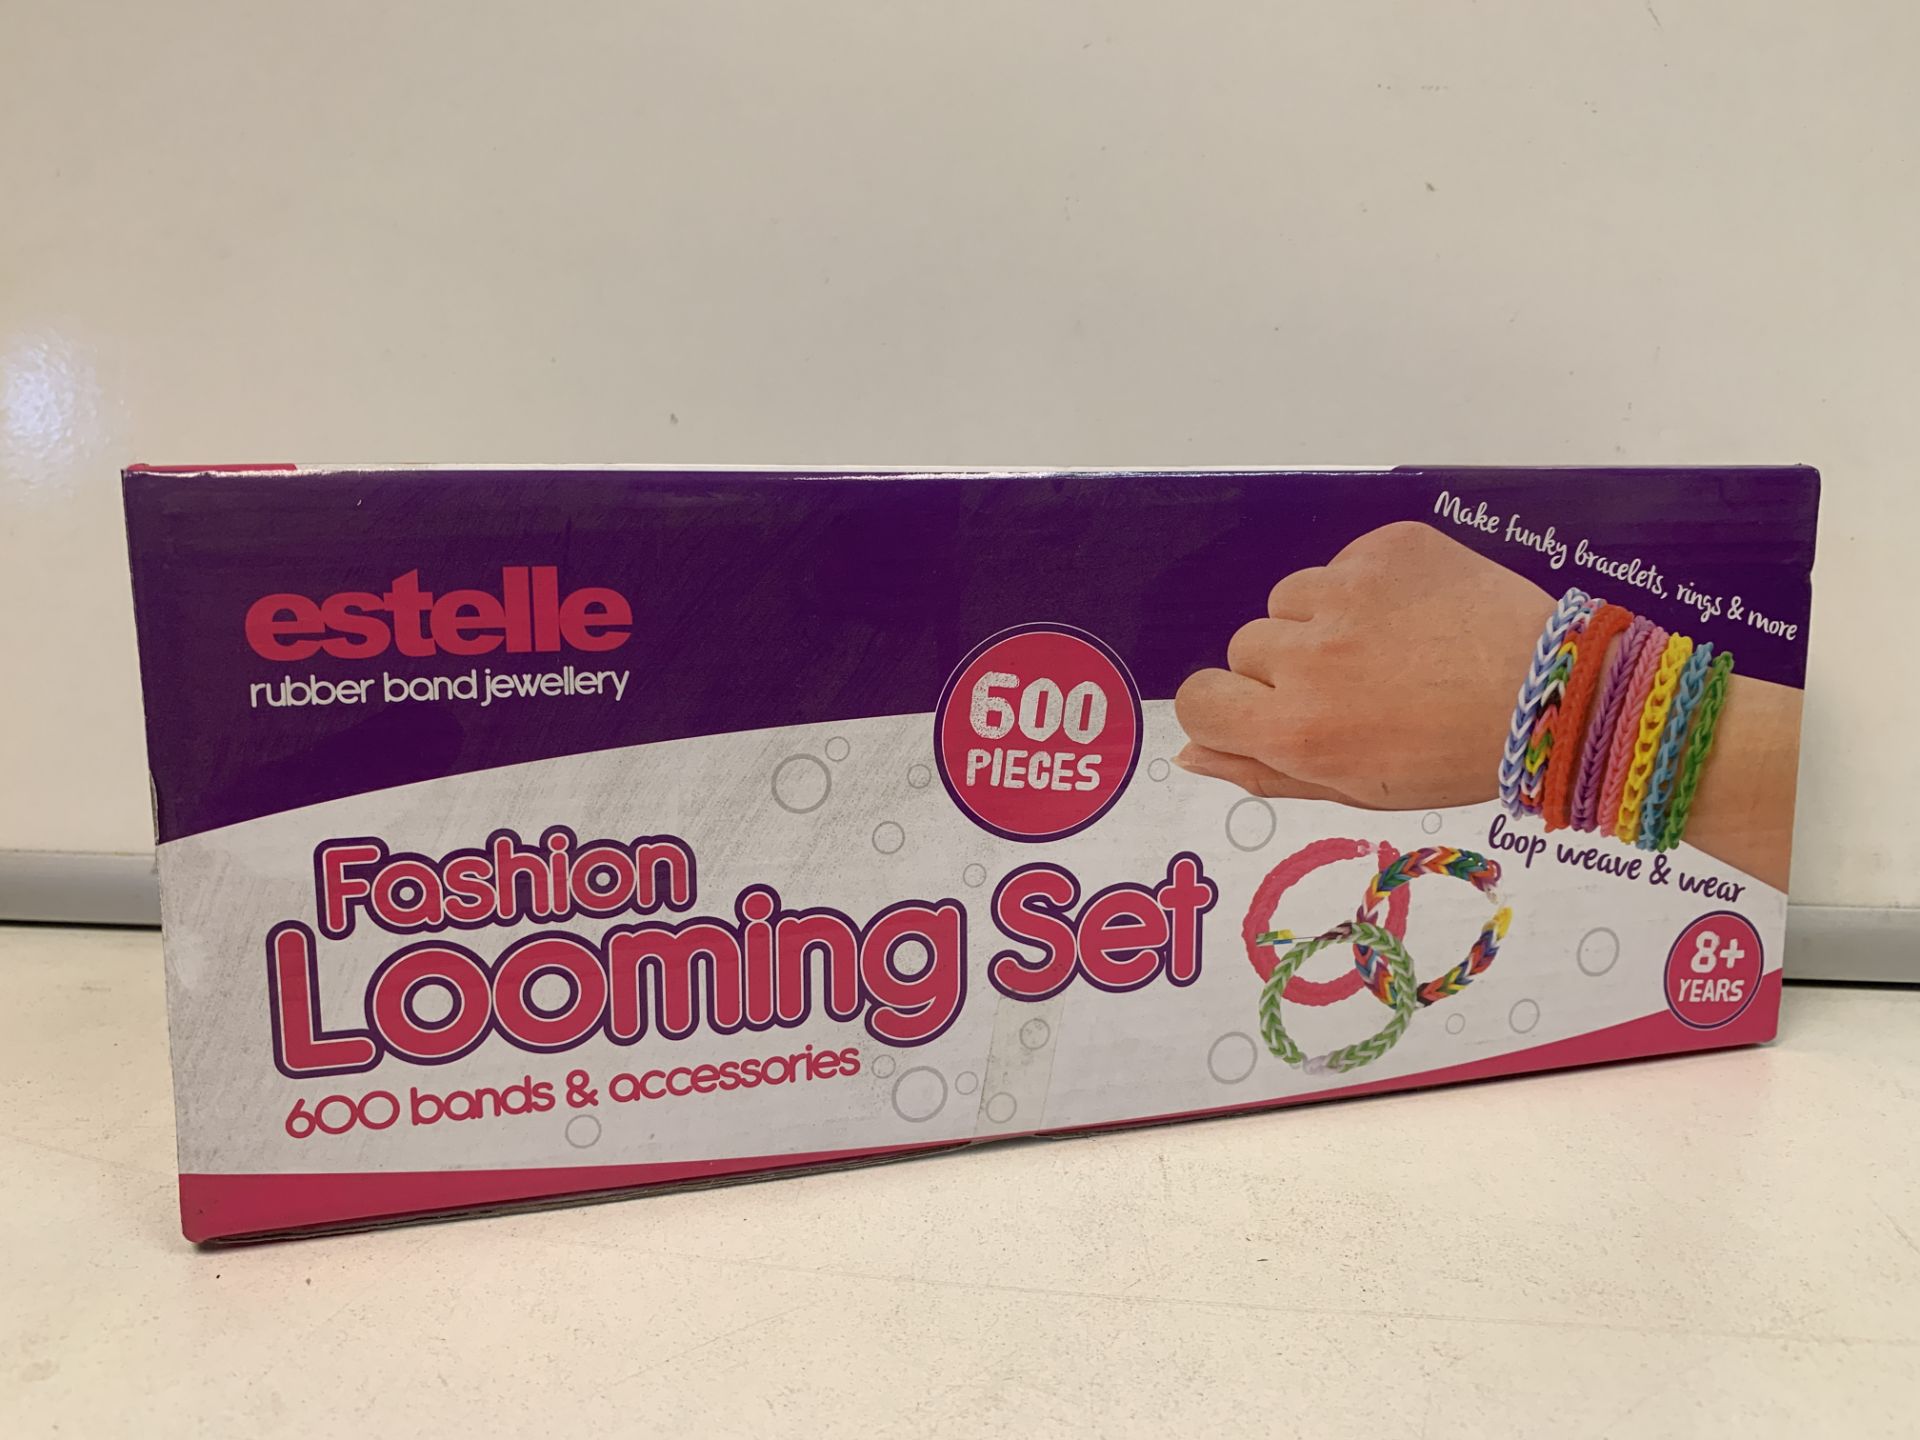 48 X NEW BXOED ESTELLE RUBBER BAND JEWELLERY FASHION LOOMING SETS. 600 PIECE SET. RRP £15 EACH